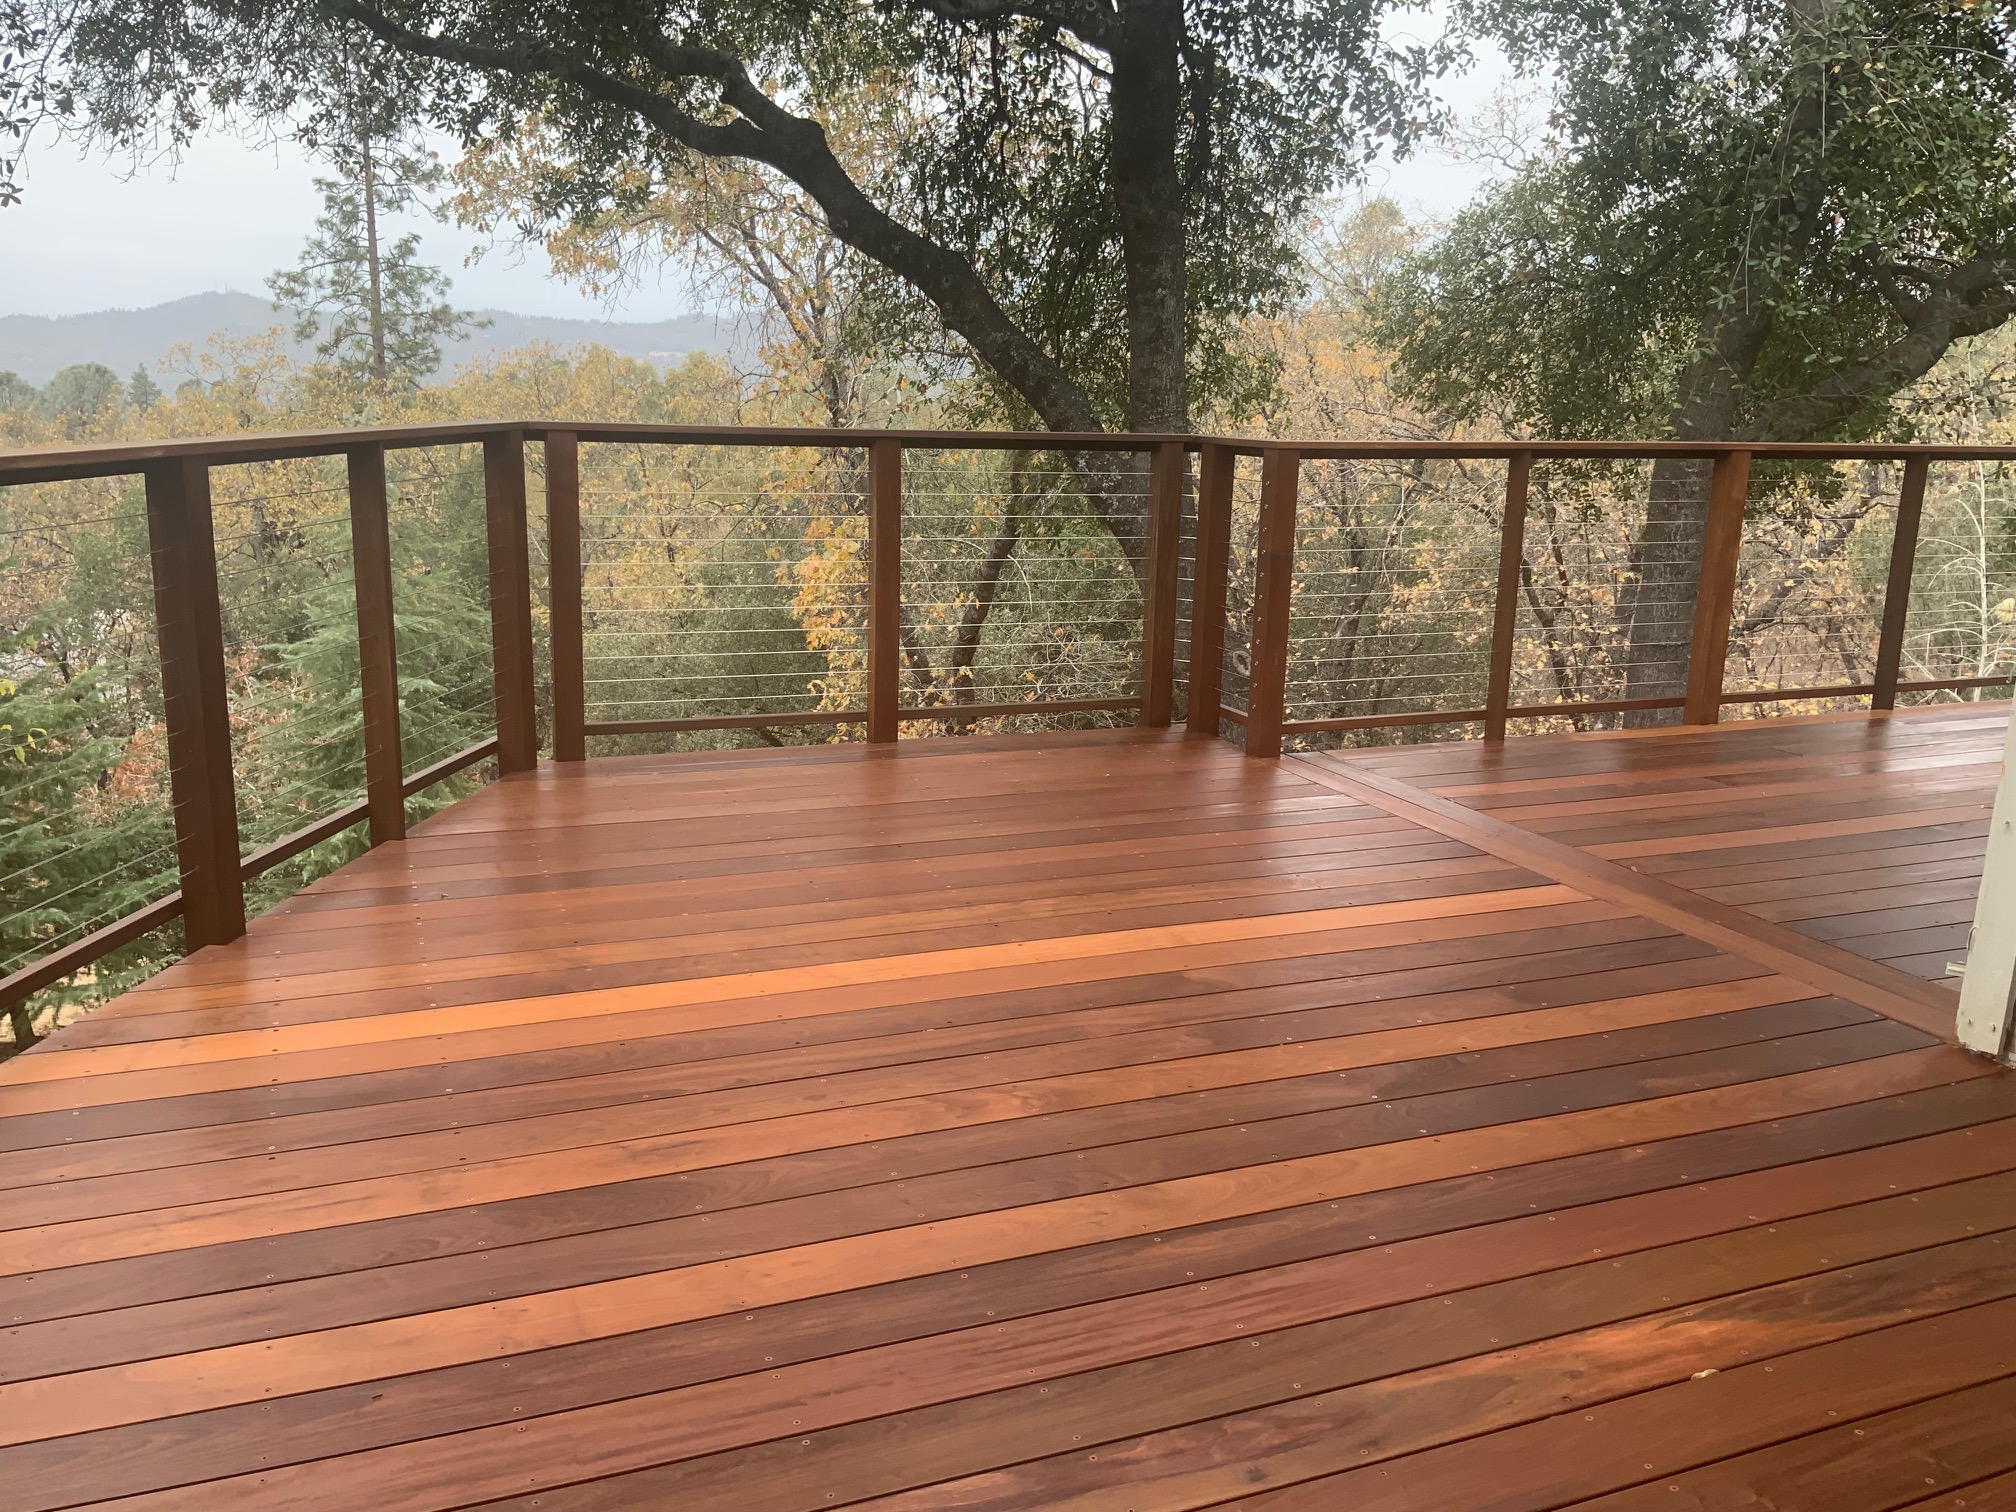 How Long Should Deck Stain Dry Before Walking On It: Quick Tips